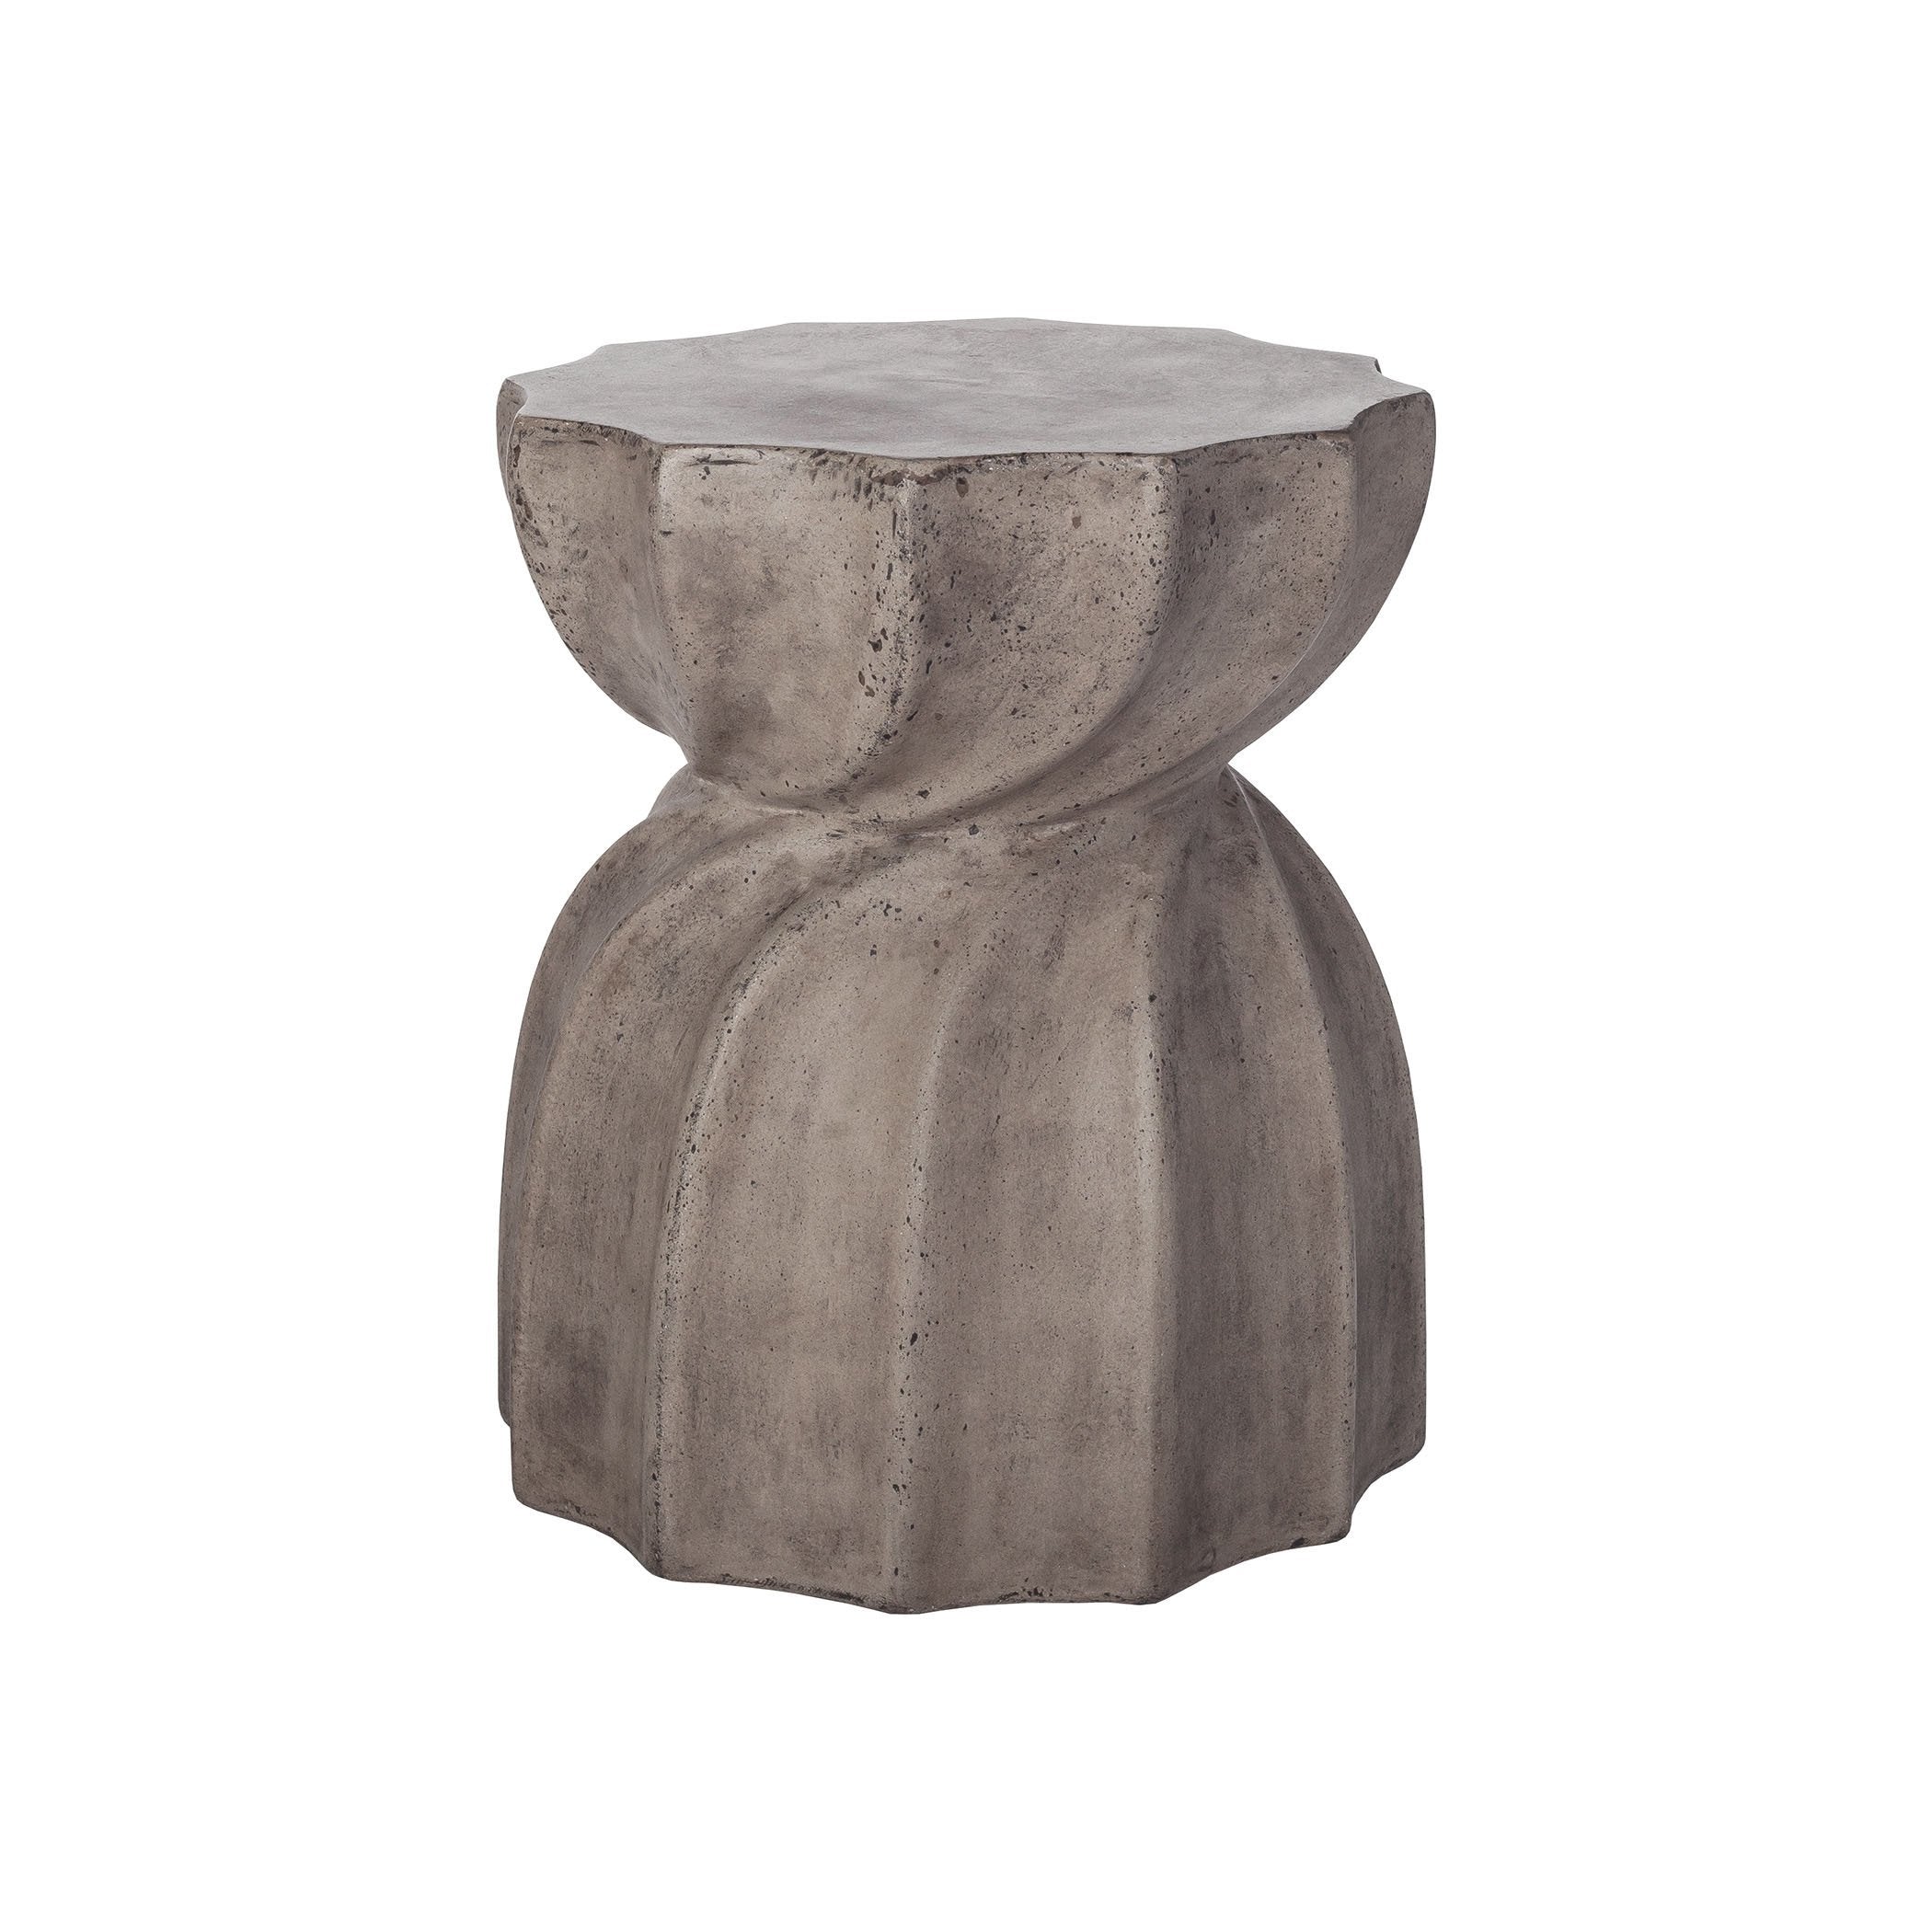 Guildmaster Gui-157-032 Industrial Warp Collection Waxed Concrete Finish Table